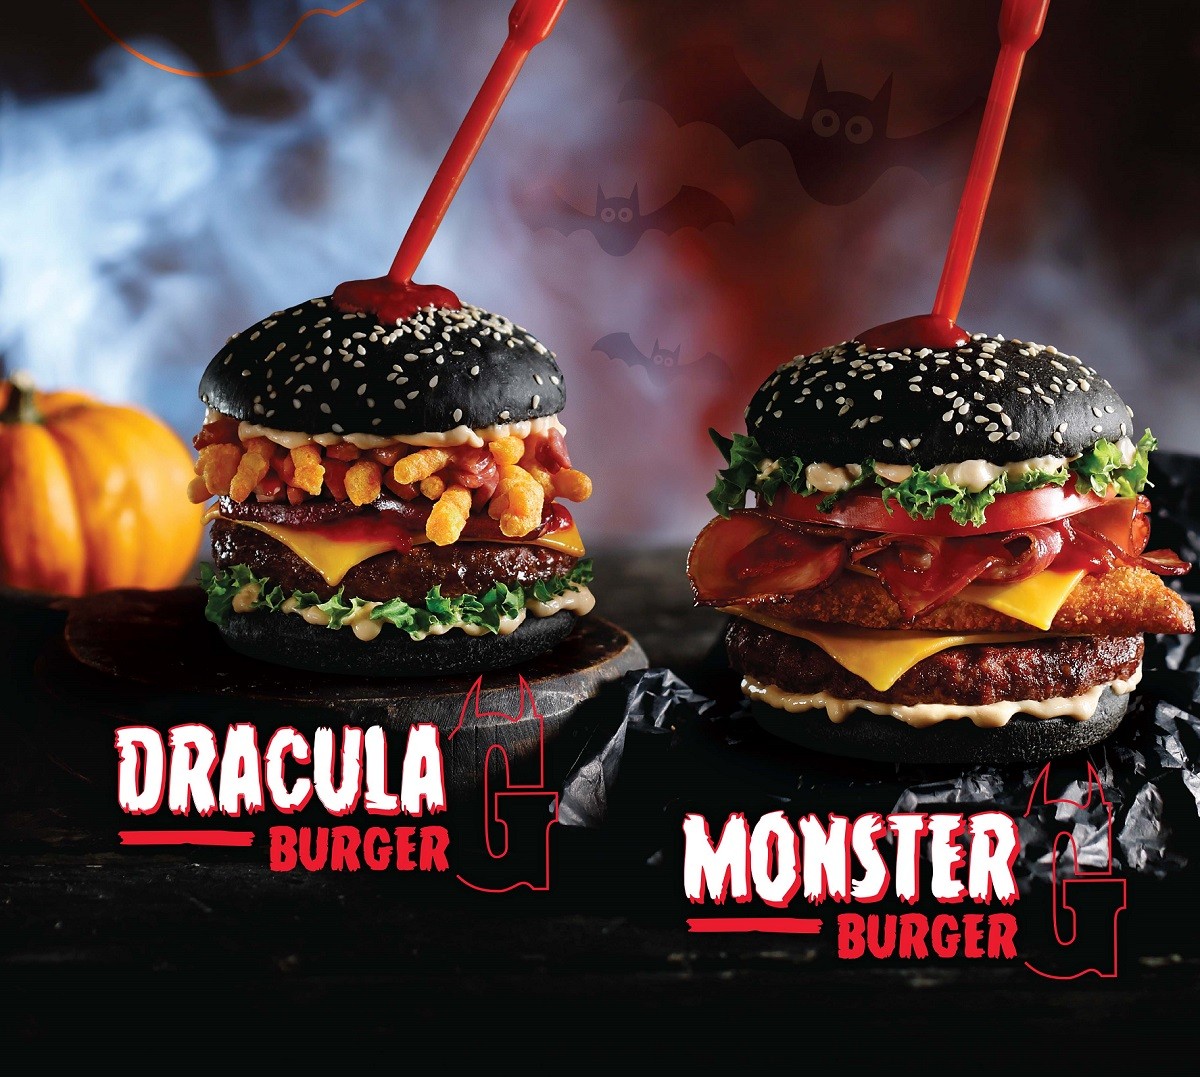 70X100_HEADS UP MONSTER BURGERS GBH